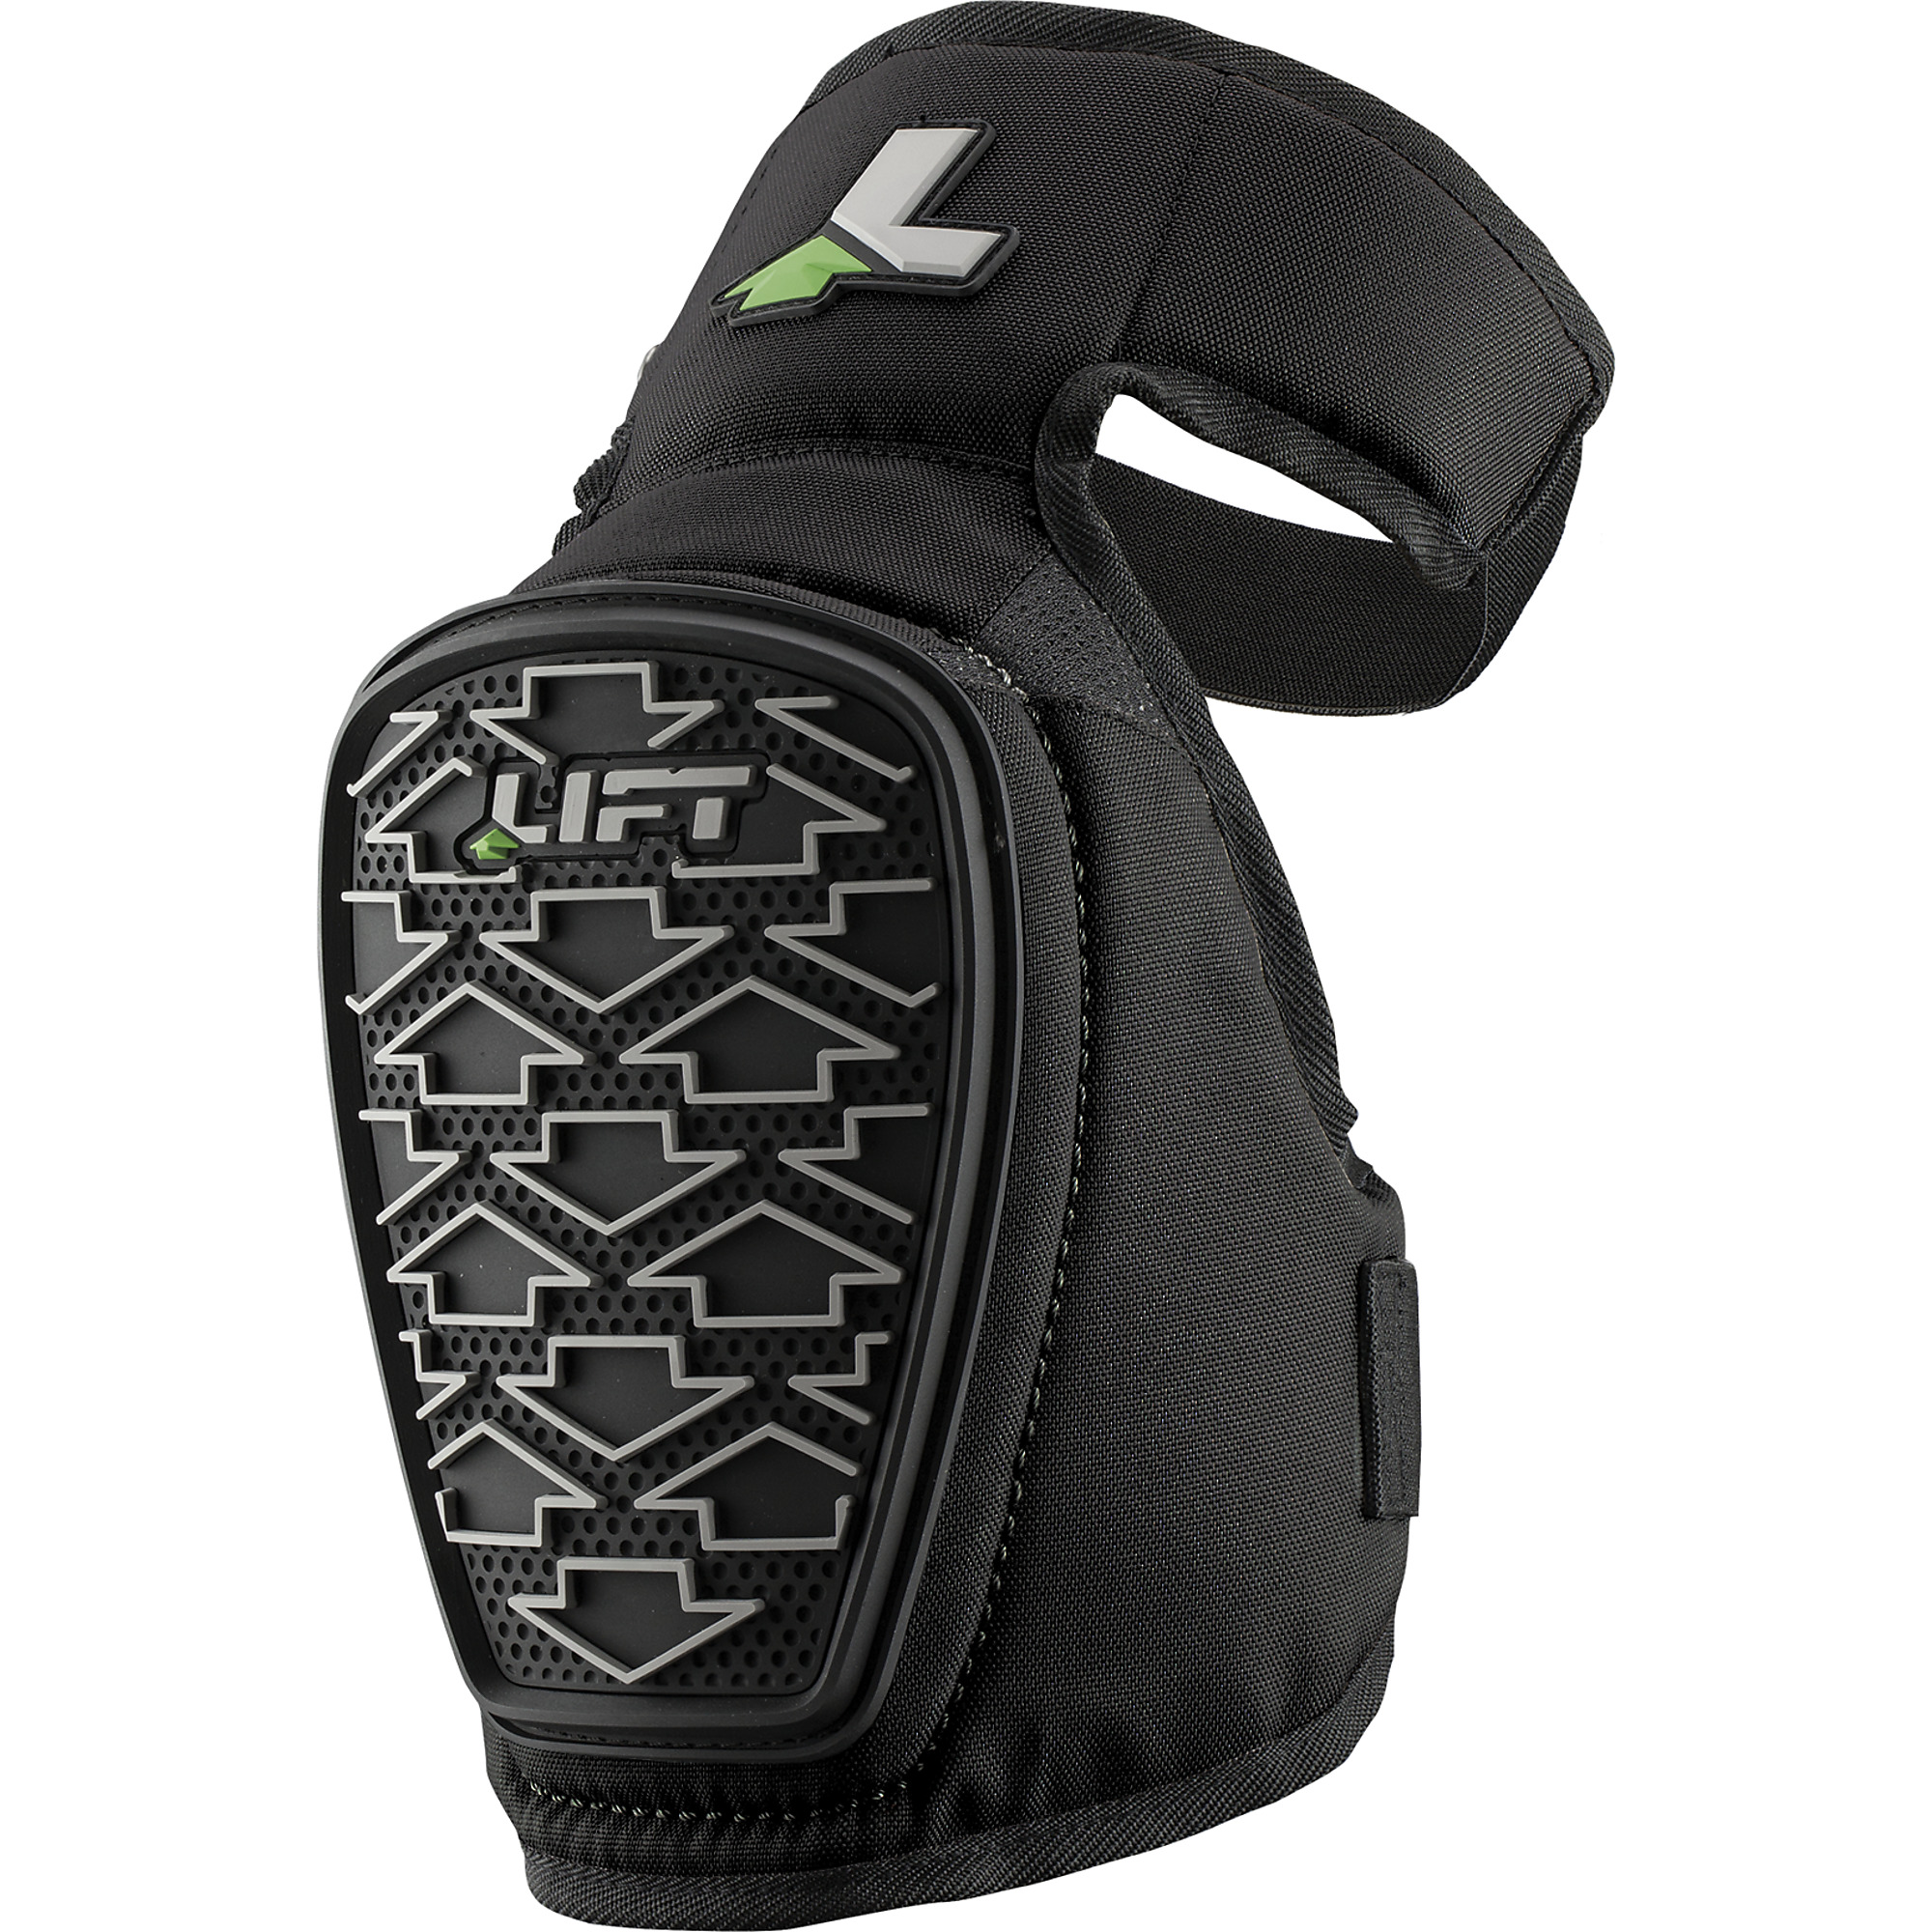 LIFT Safety, PIVOTAL-2 Knee Guard, Included (qty.) 2, Color Black, Model KP2-0K